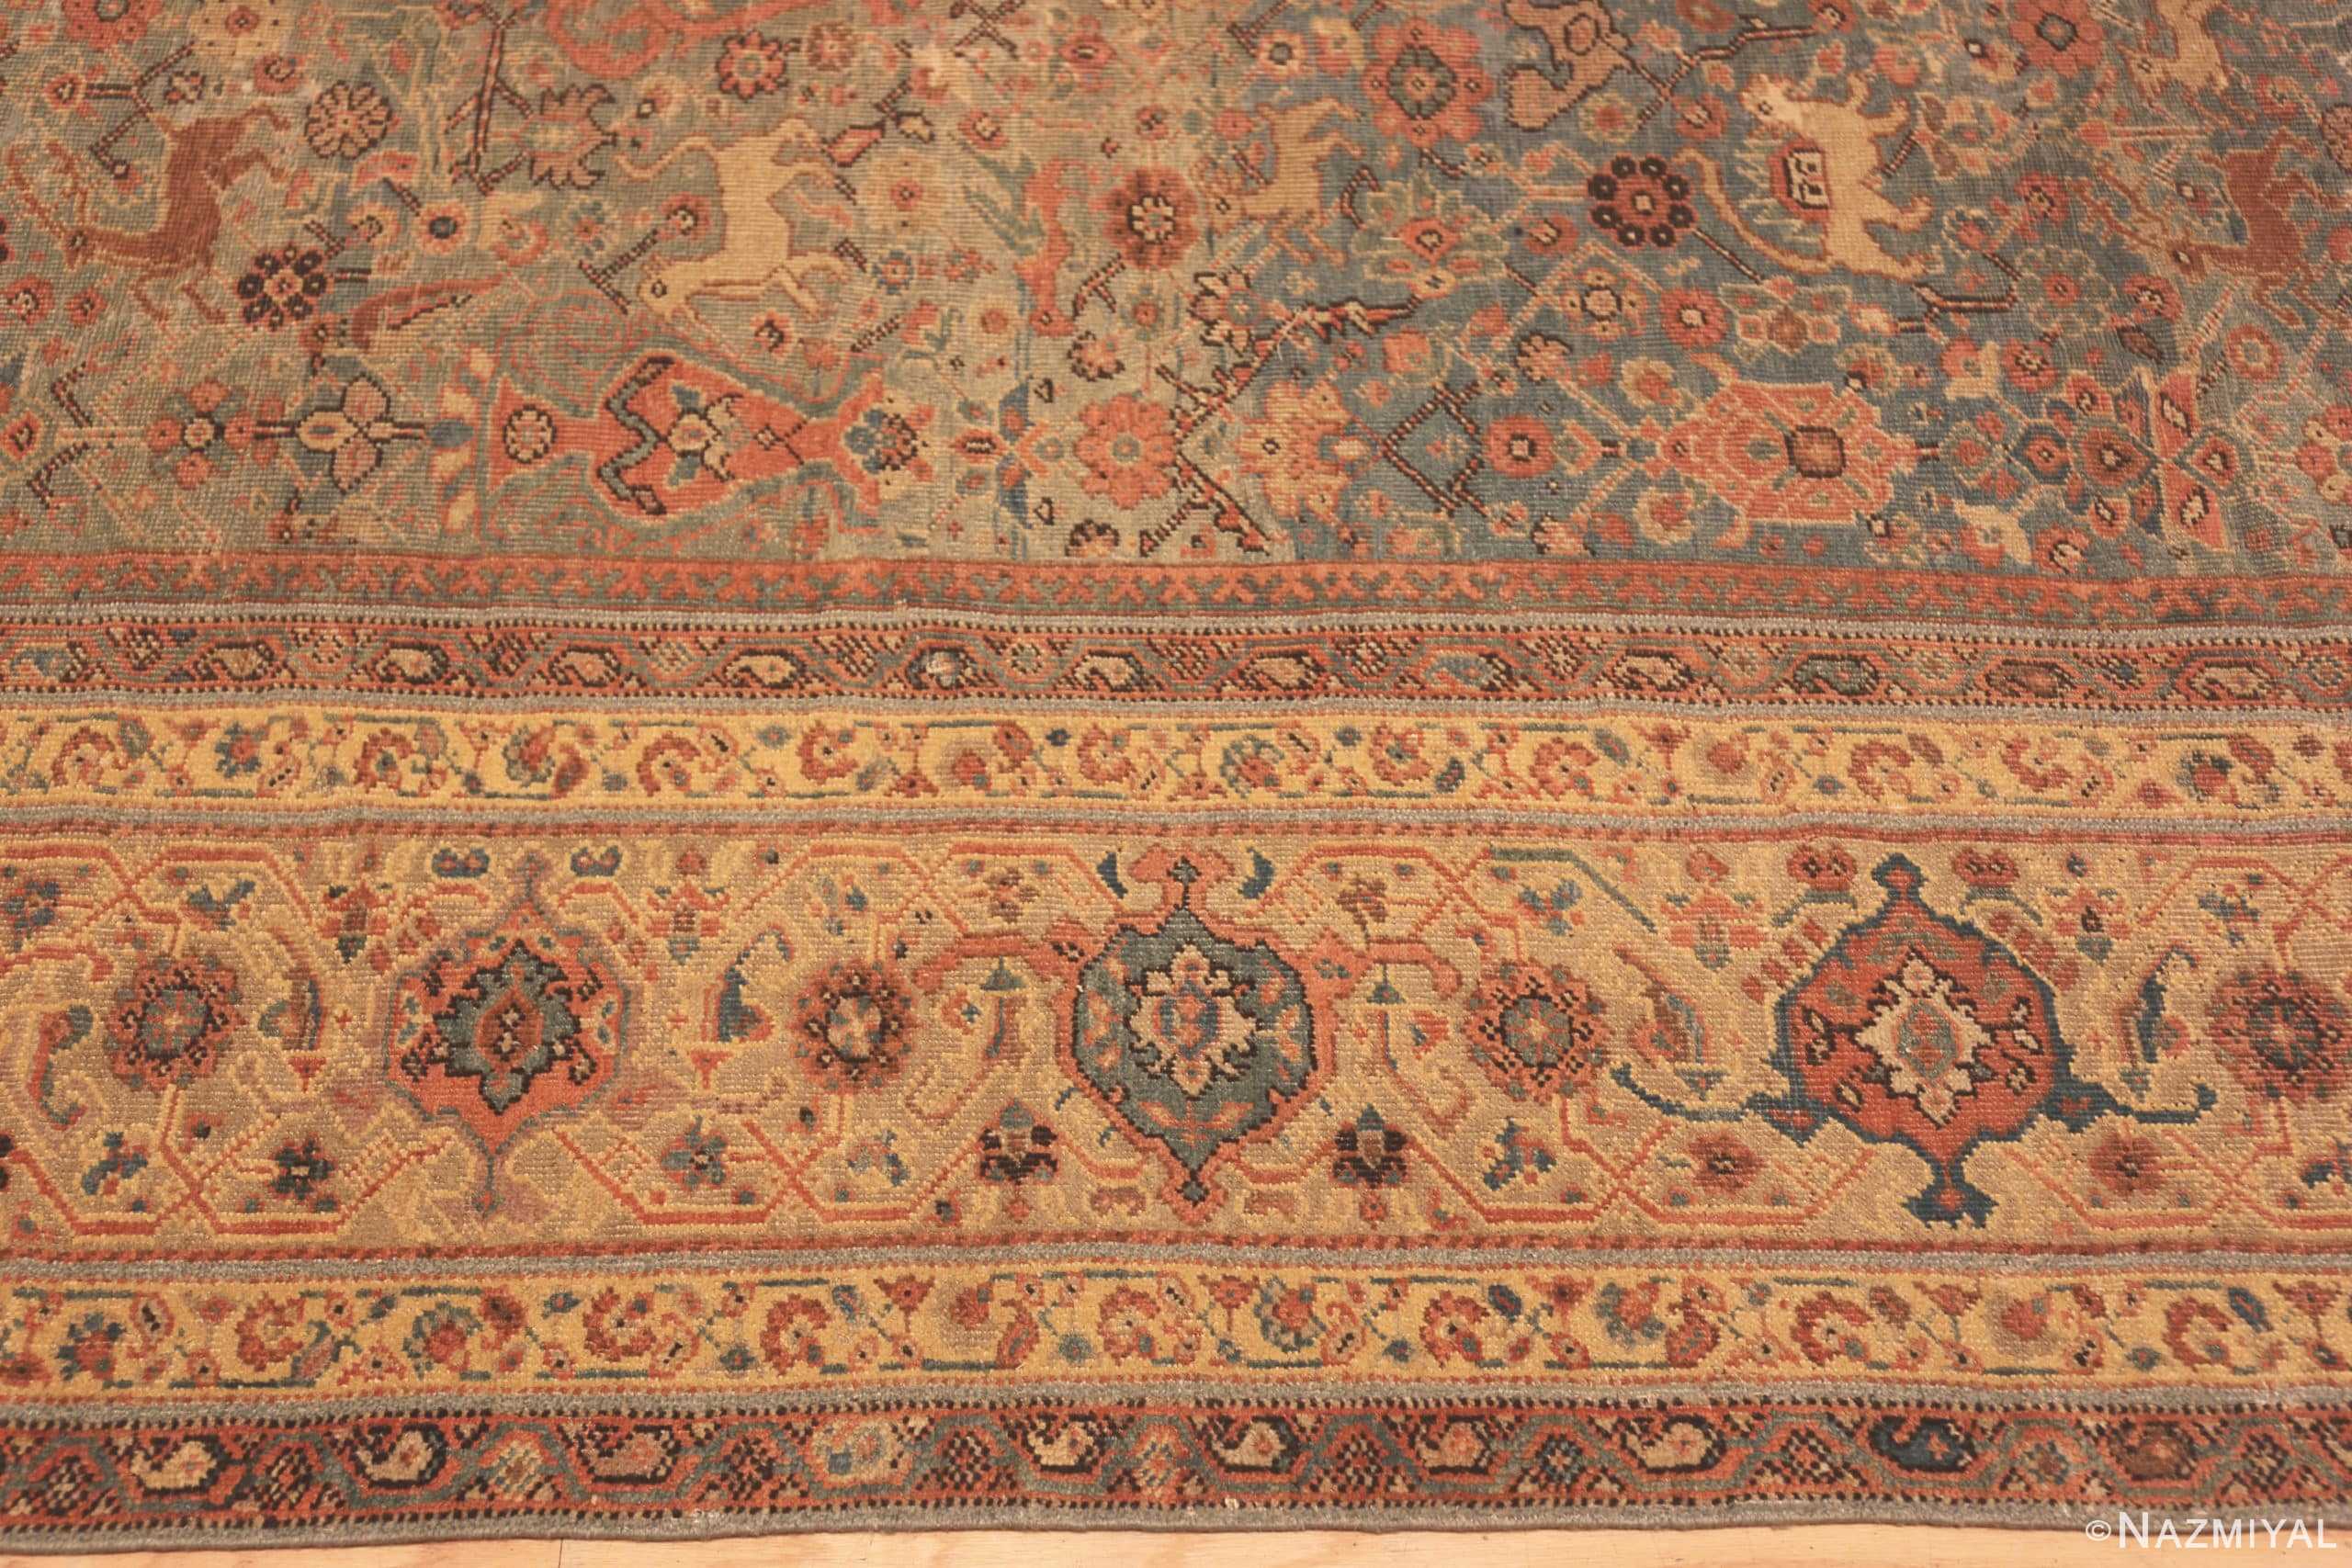 Border Of Large Antique Persian Animal Design Sultanabad Rug 71476 by Nazmiyal Antique Rugs